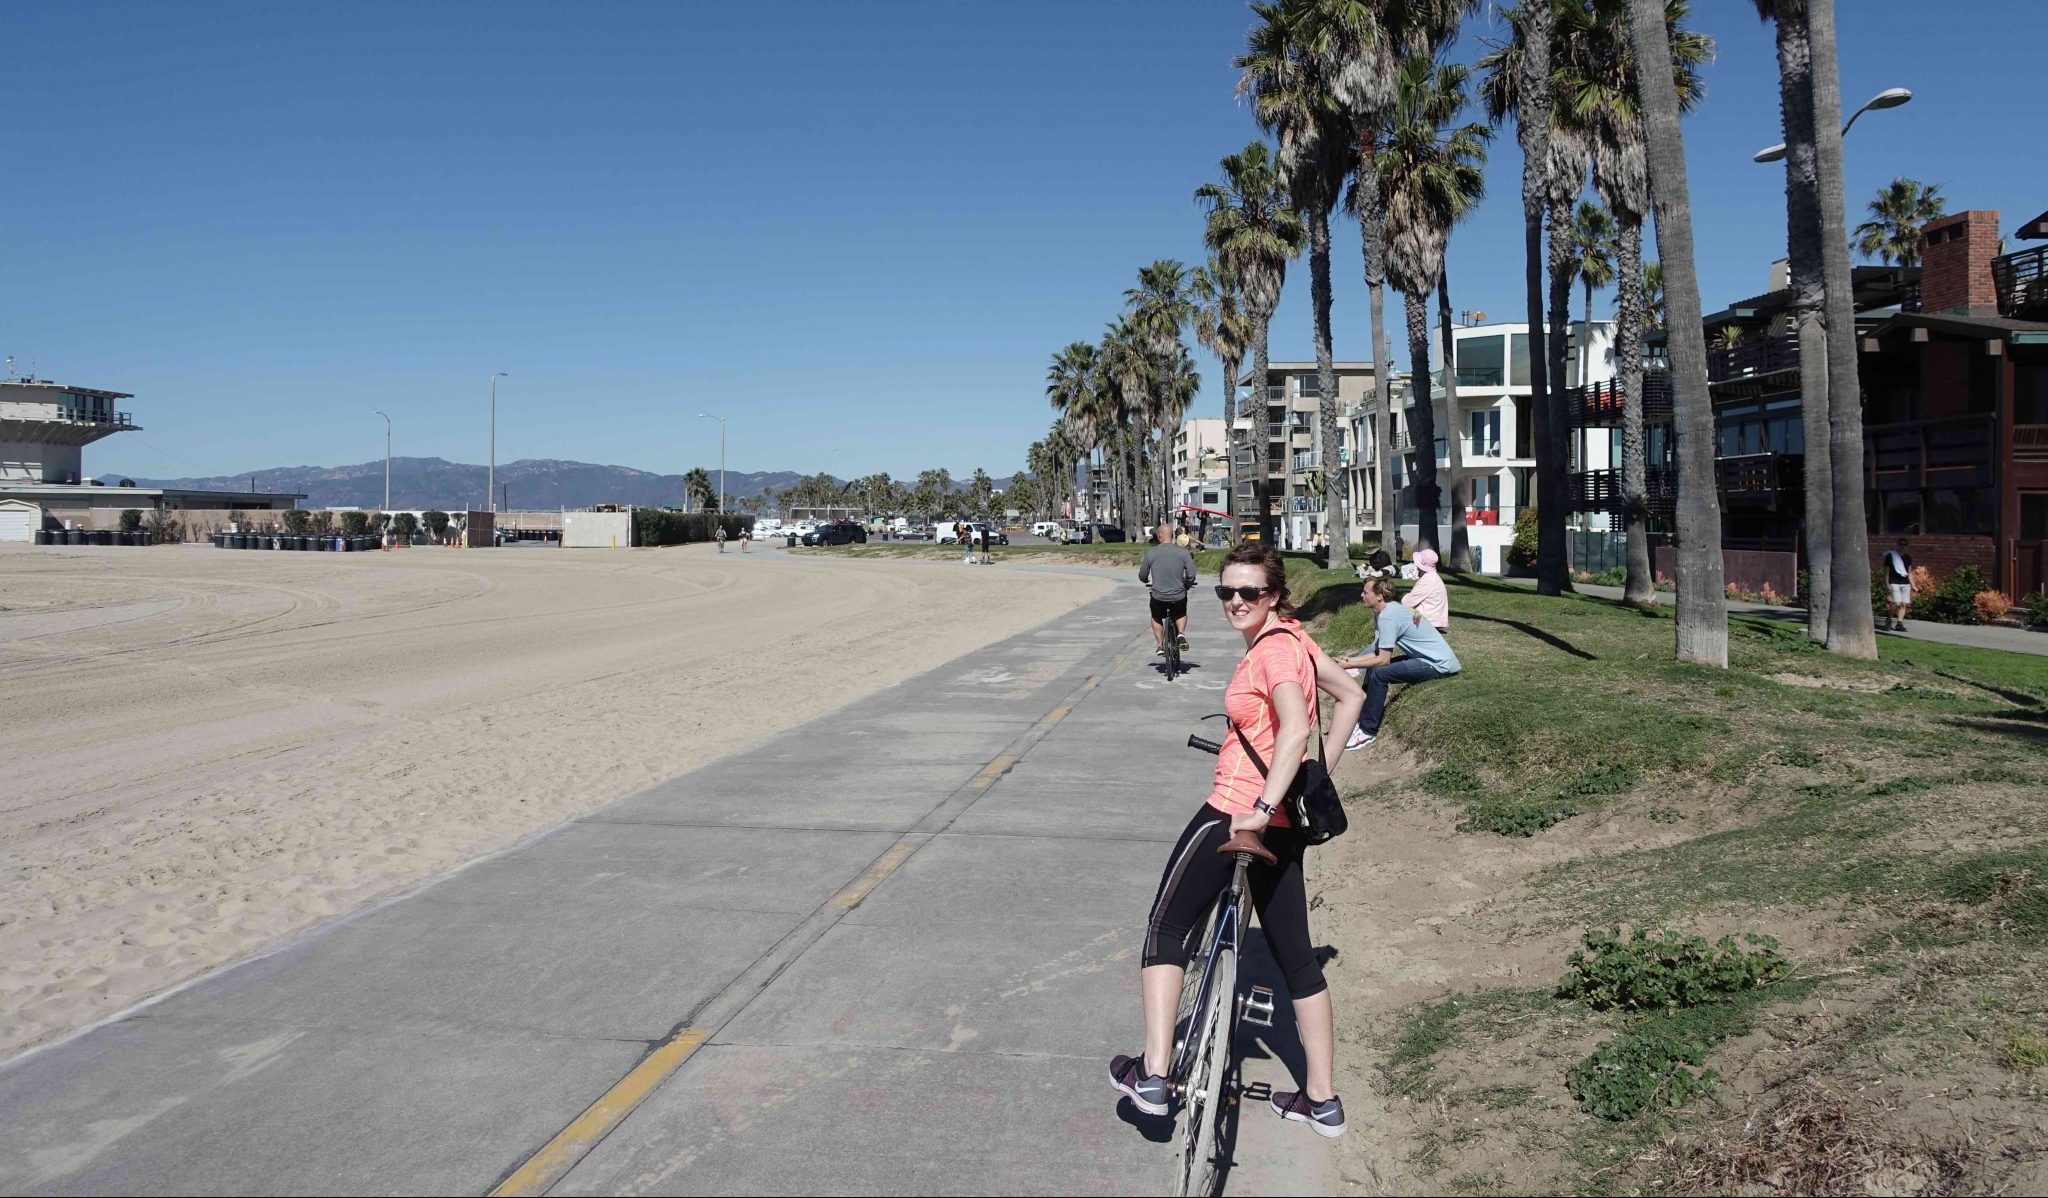 cycling on the beaches in LA